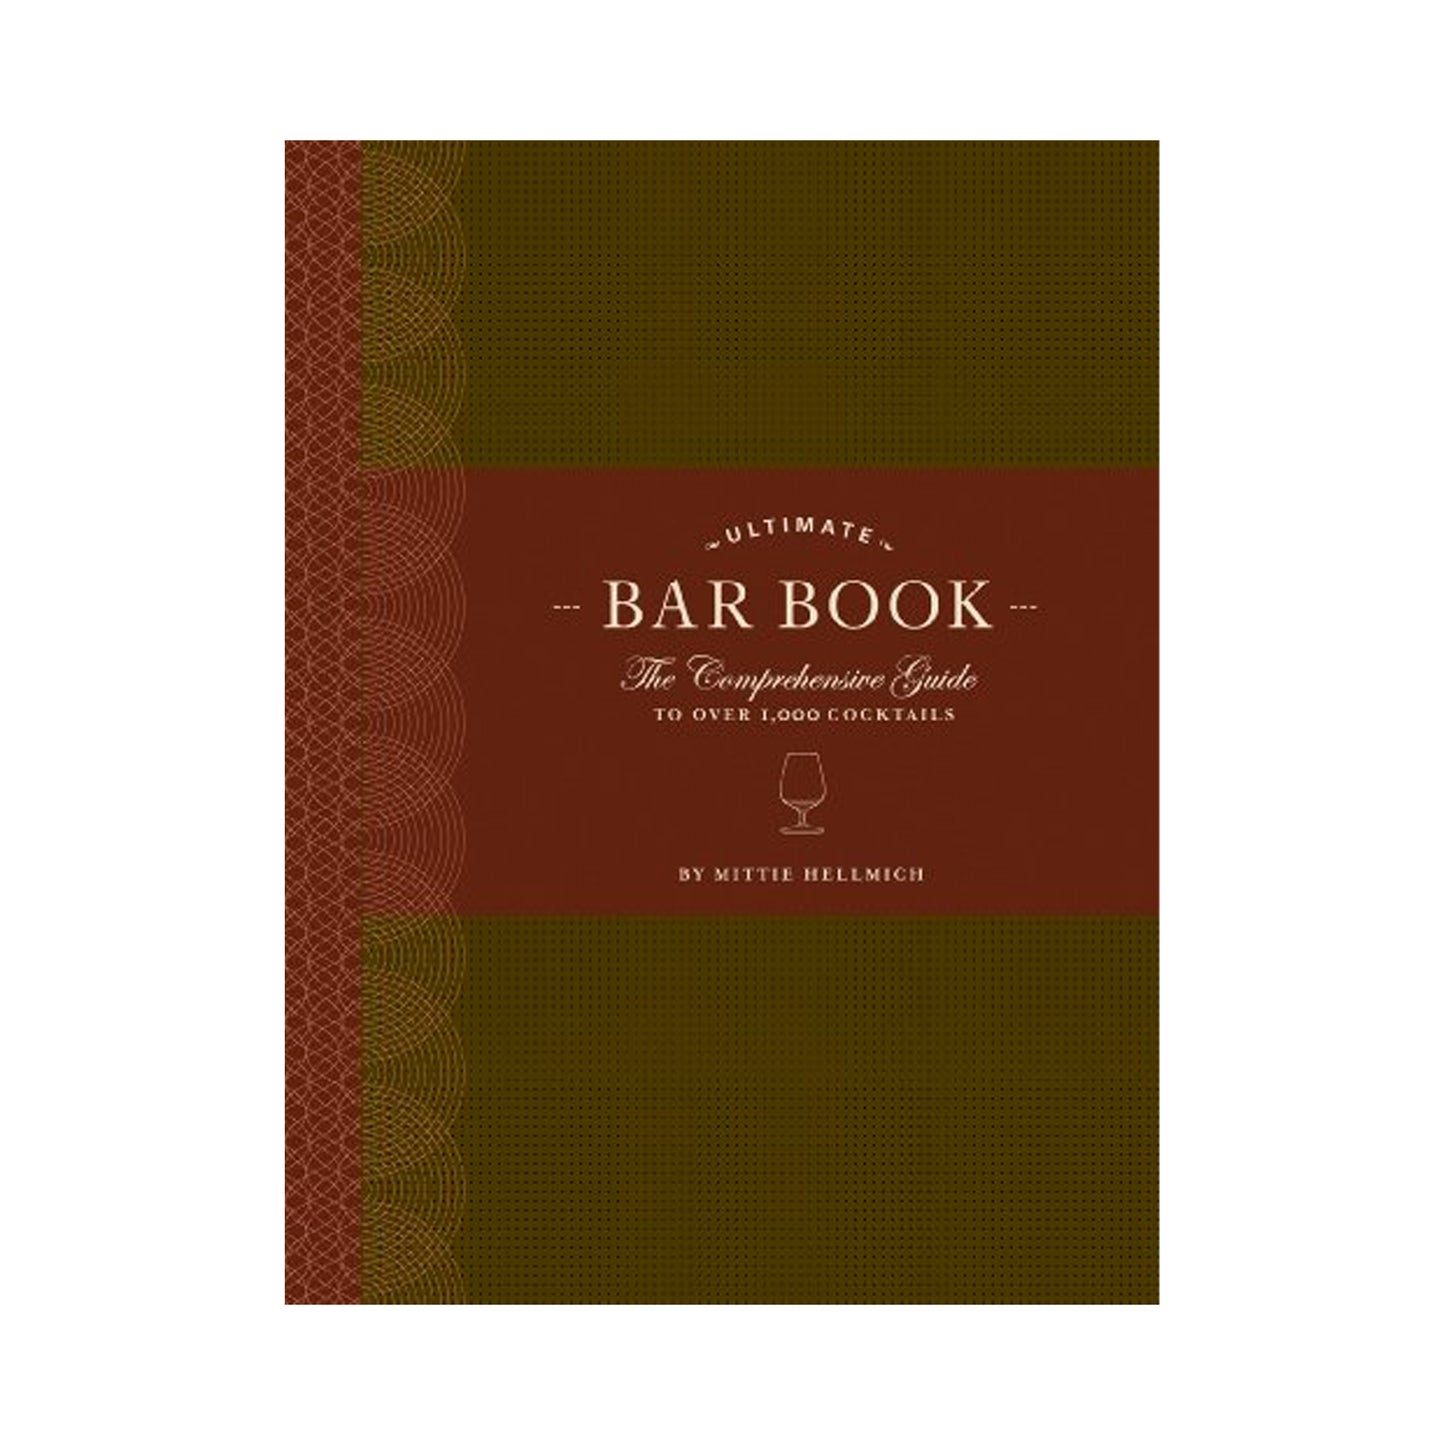 The Ultimate Bar Book: A Comprehensive Guide to Over 1,000 Cocktails by Mittie Hellmich